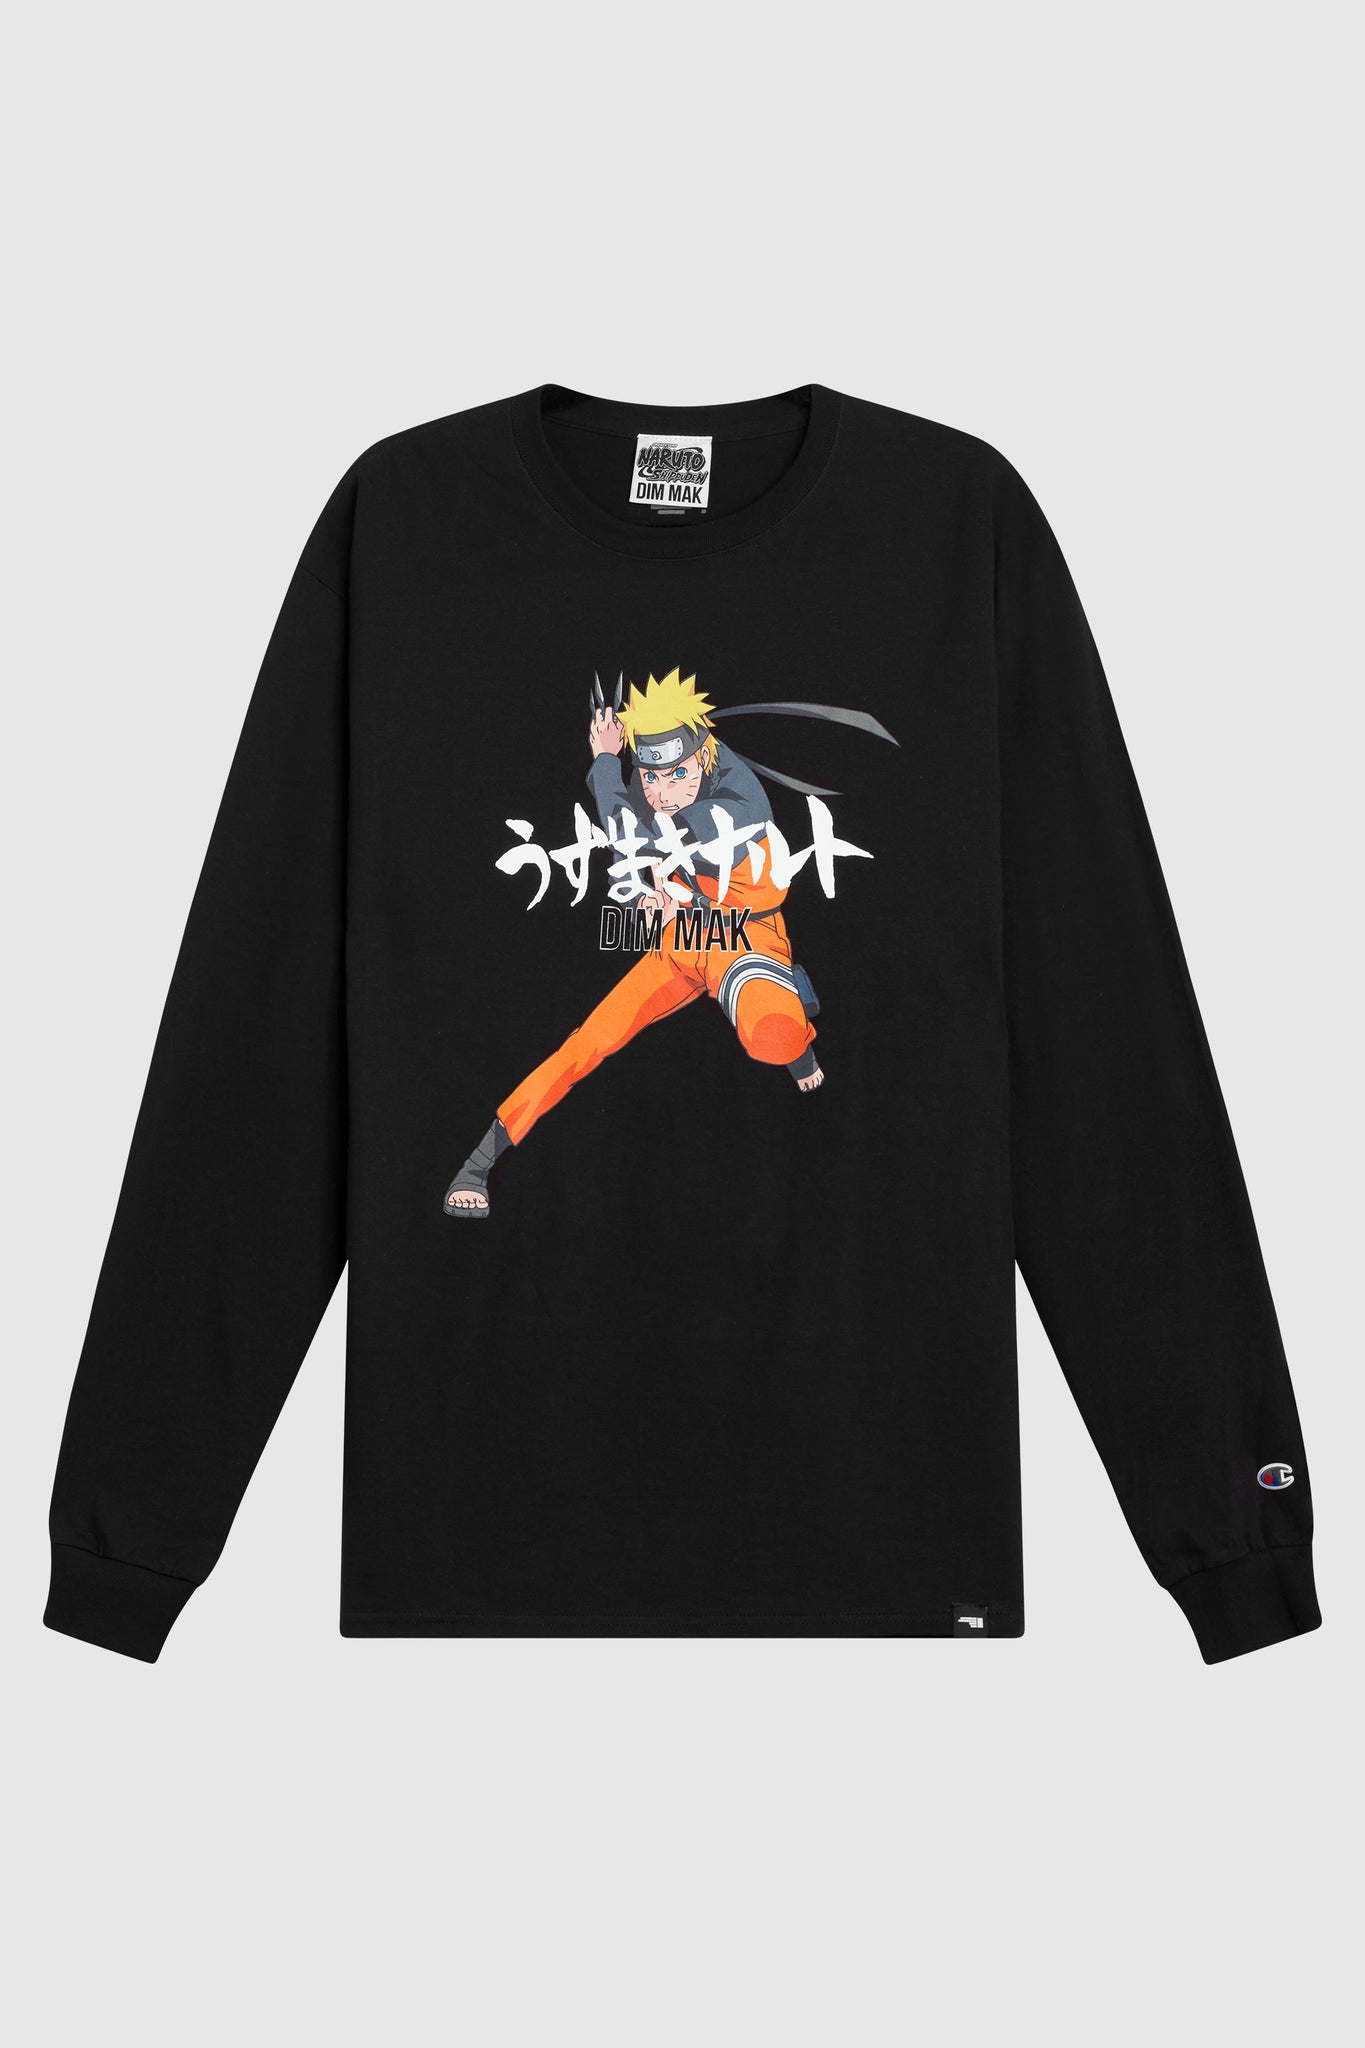 Dim Mak x Naruto - By Any Means Necessary Long Sleeve Tee